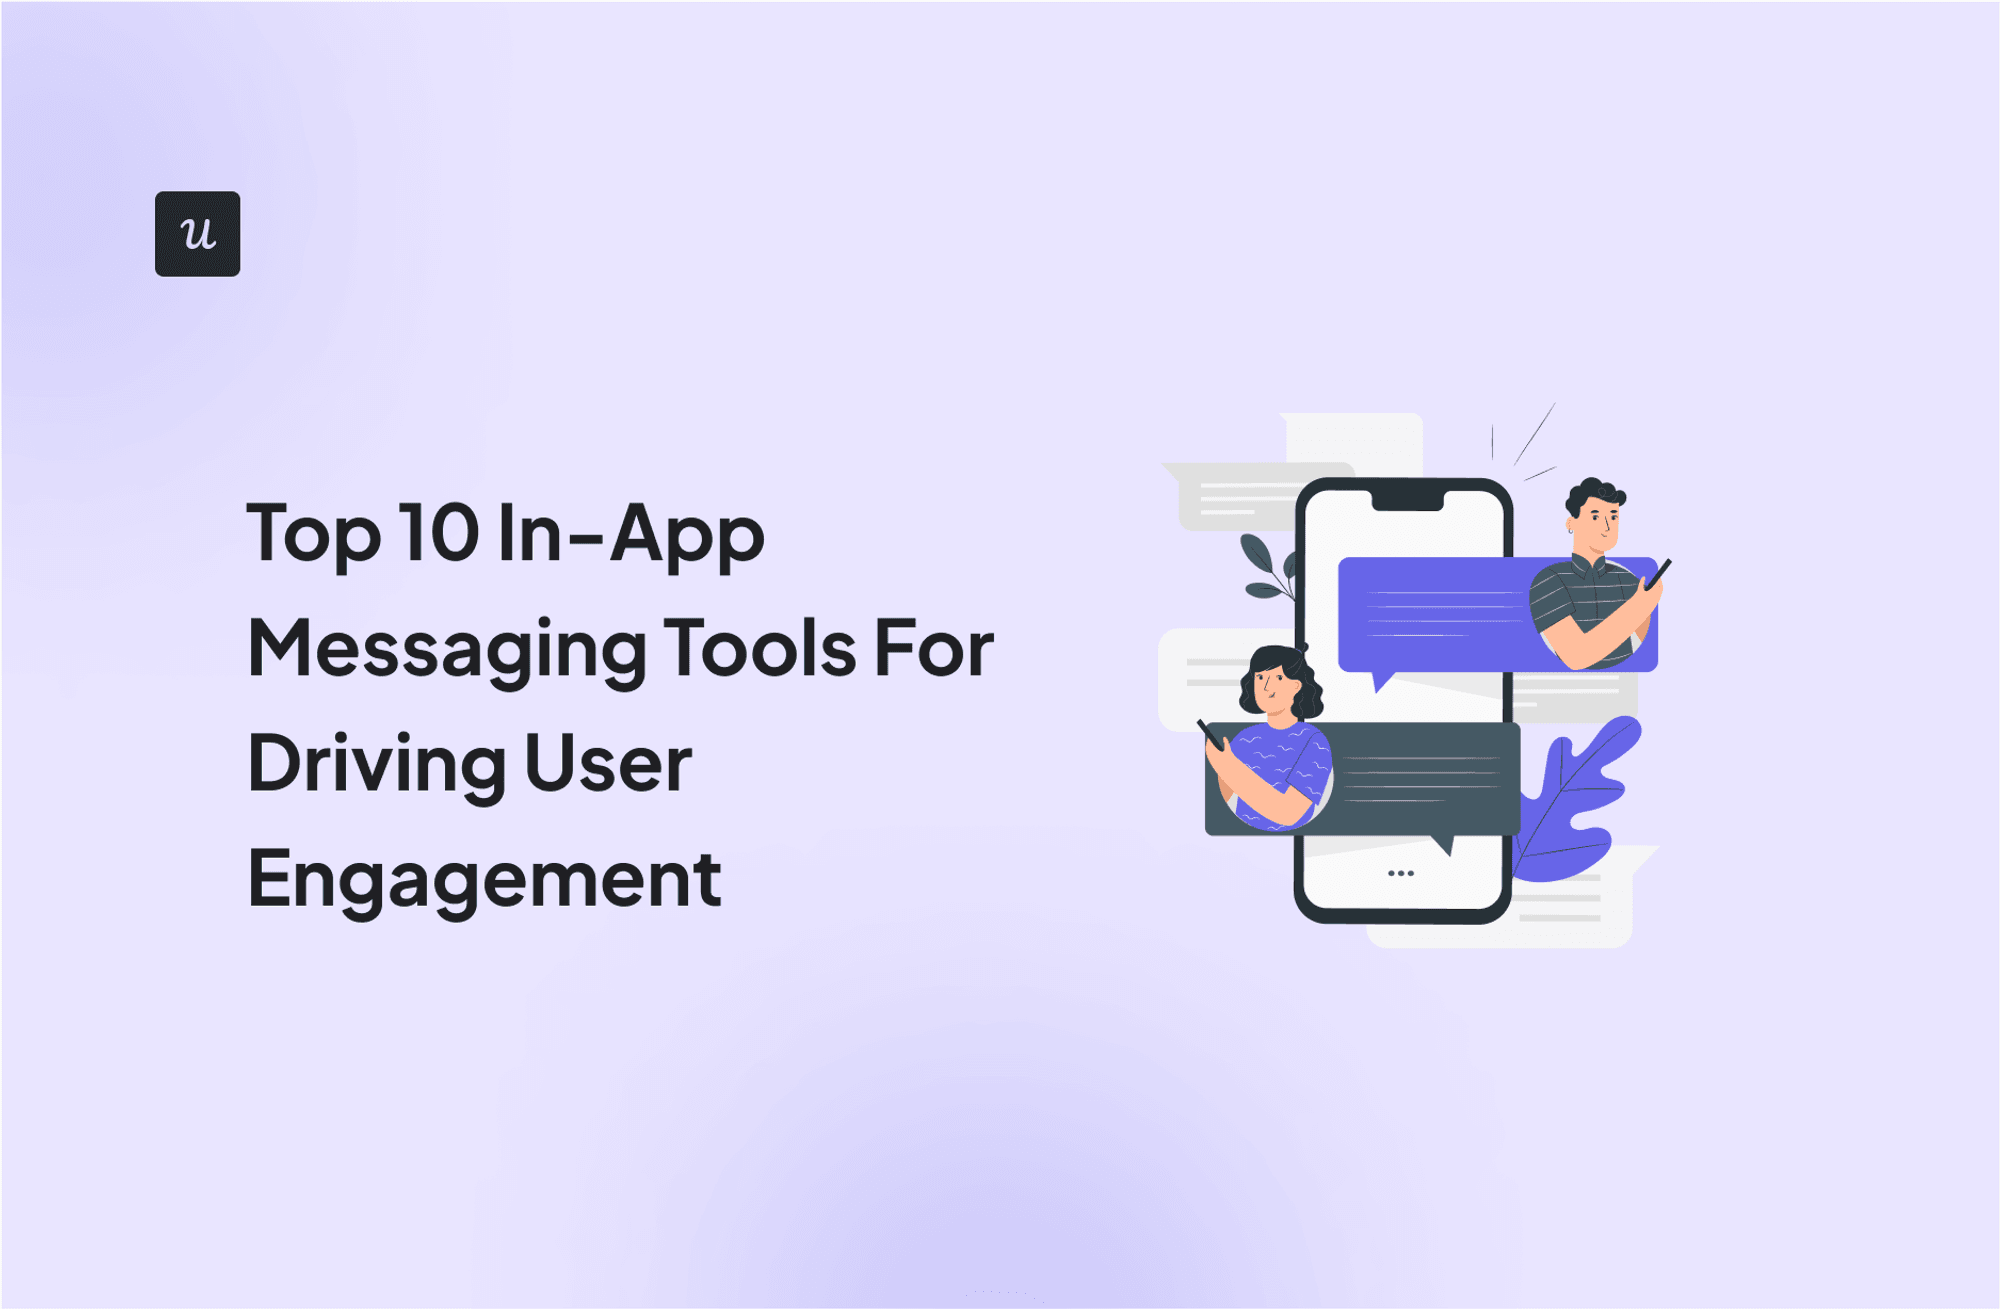 Top 10 In-App Messaging Tools For Driving User Engagement cover